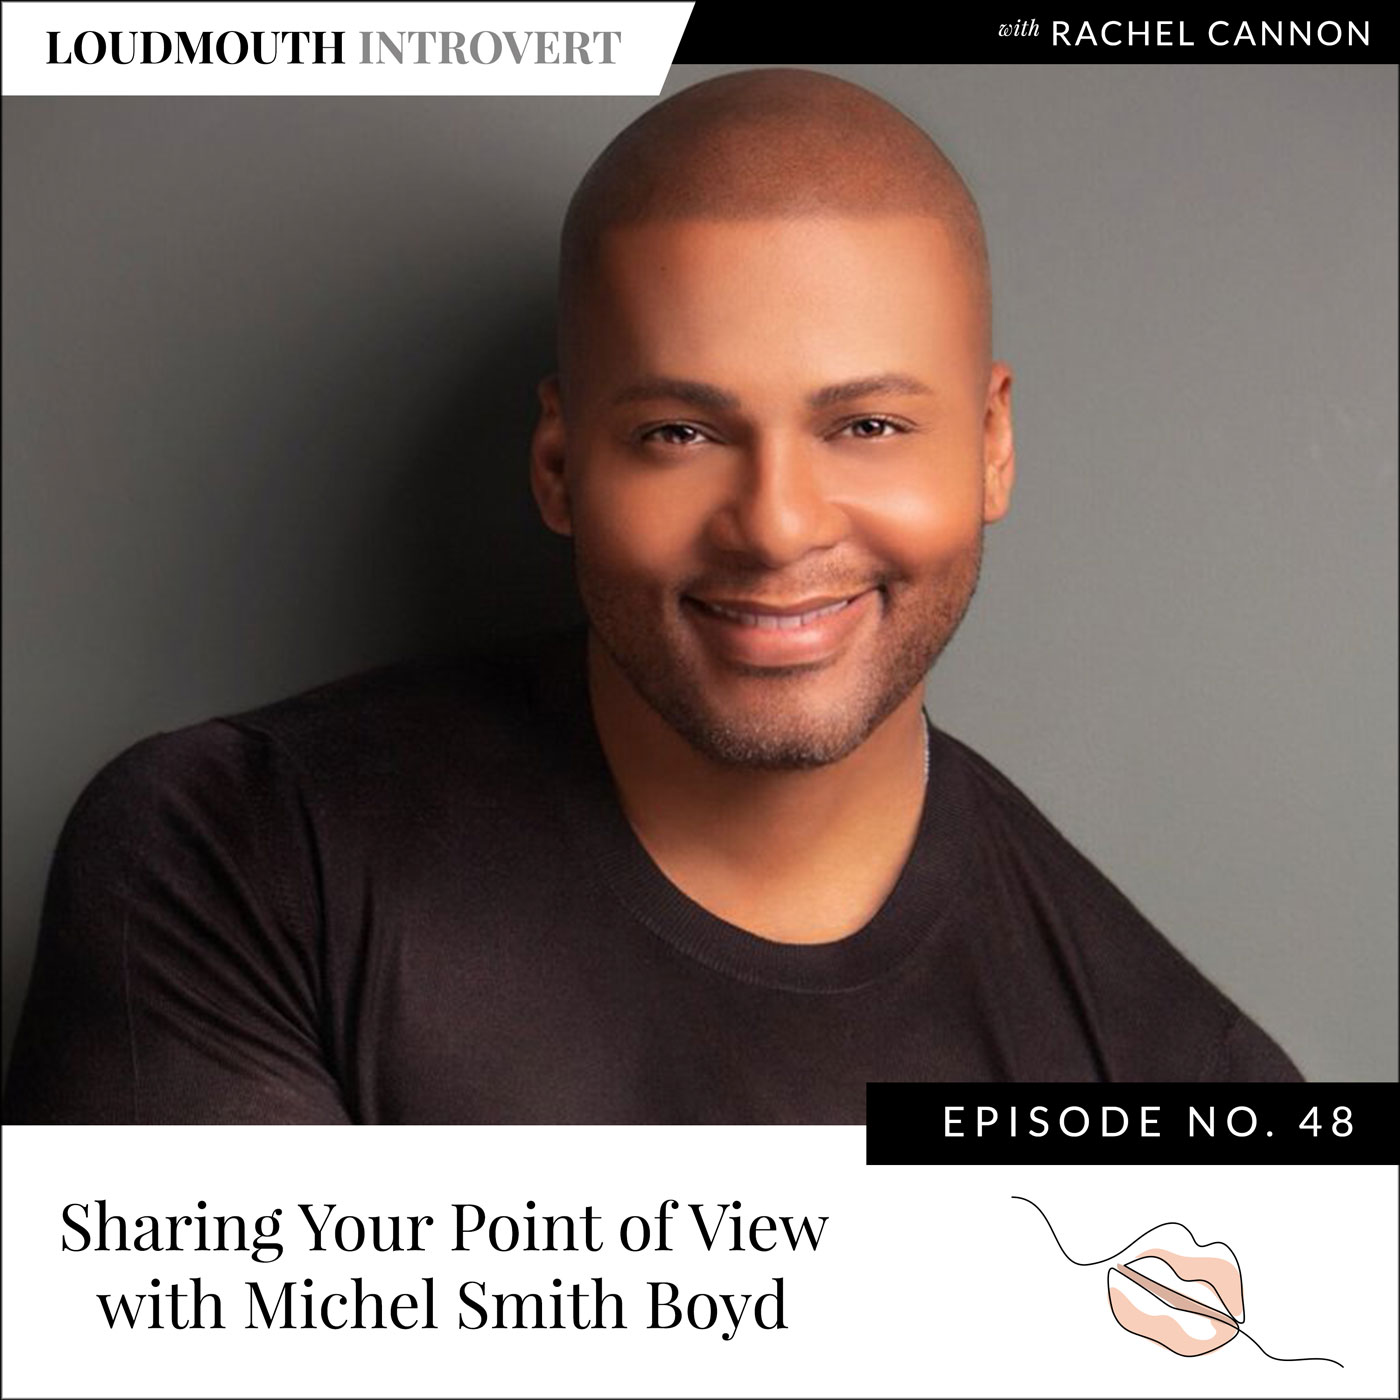 Sharing Your Point of View with Michel Smith Boyd